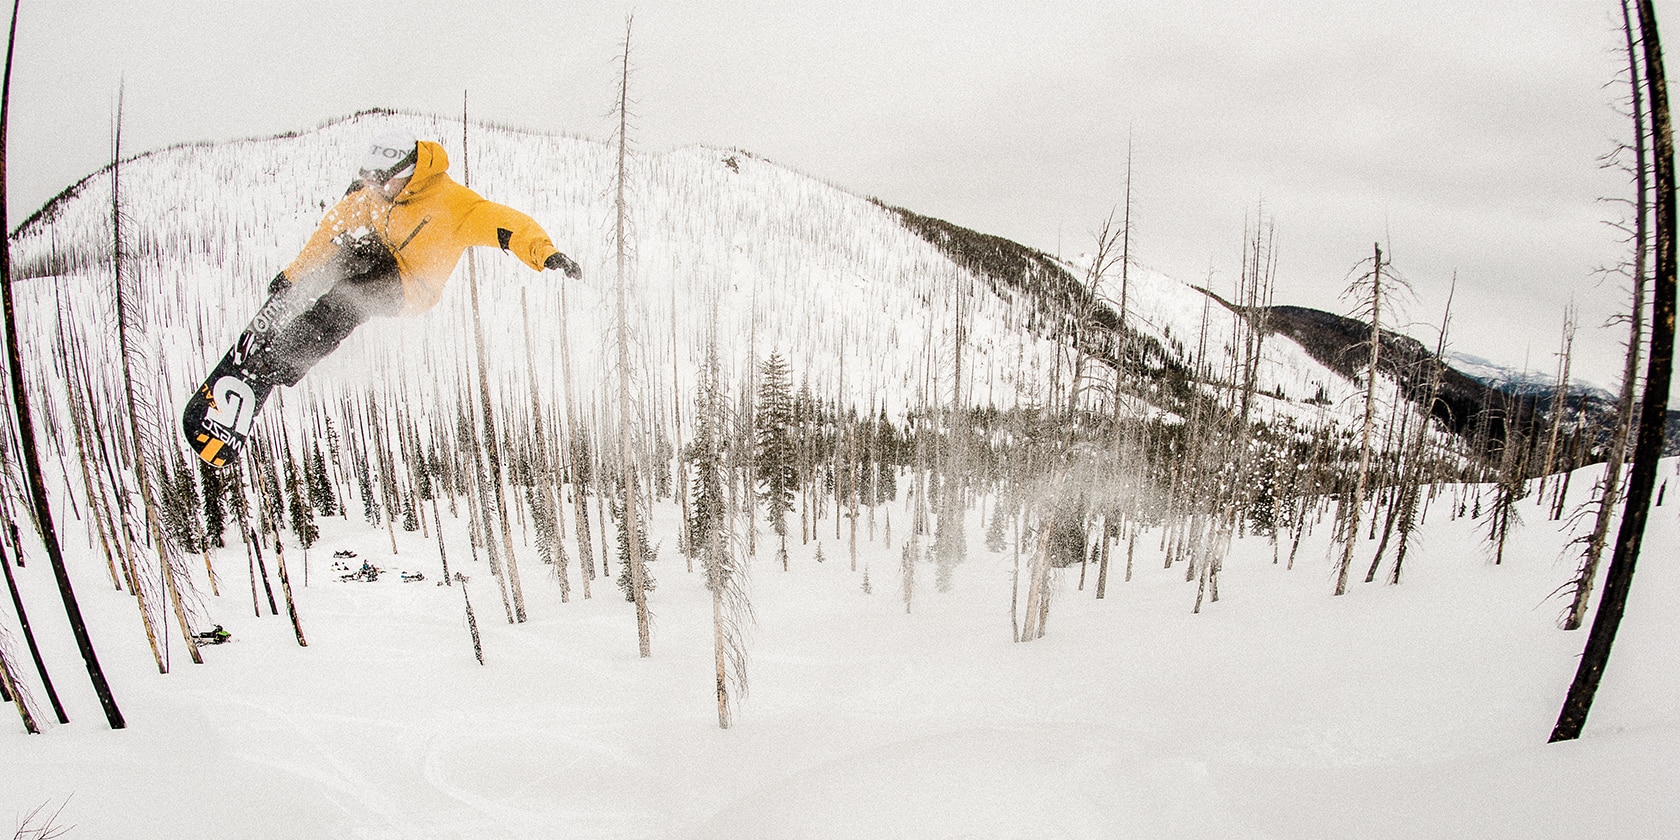 man with yellow coat jumps his snowboard through snow and trees